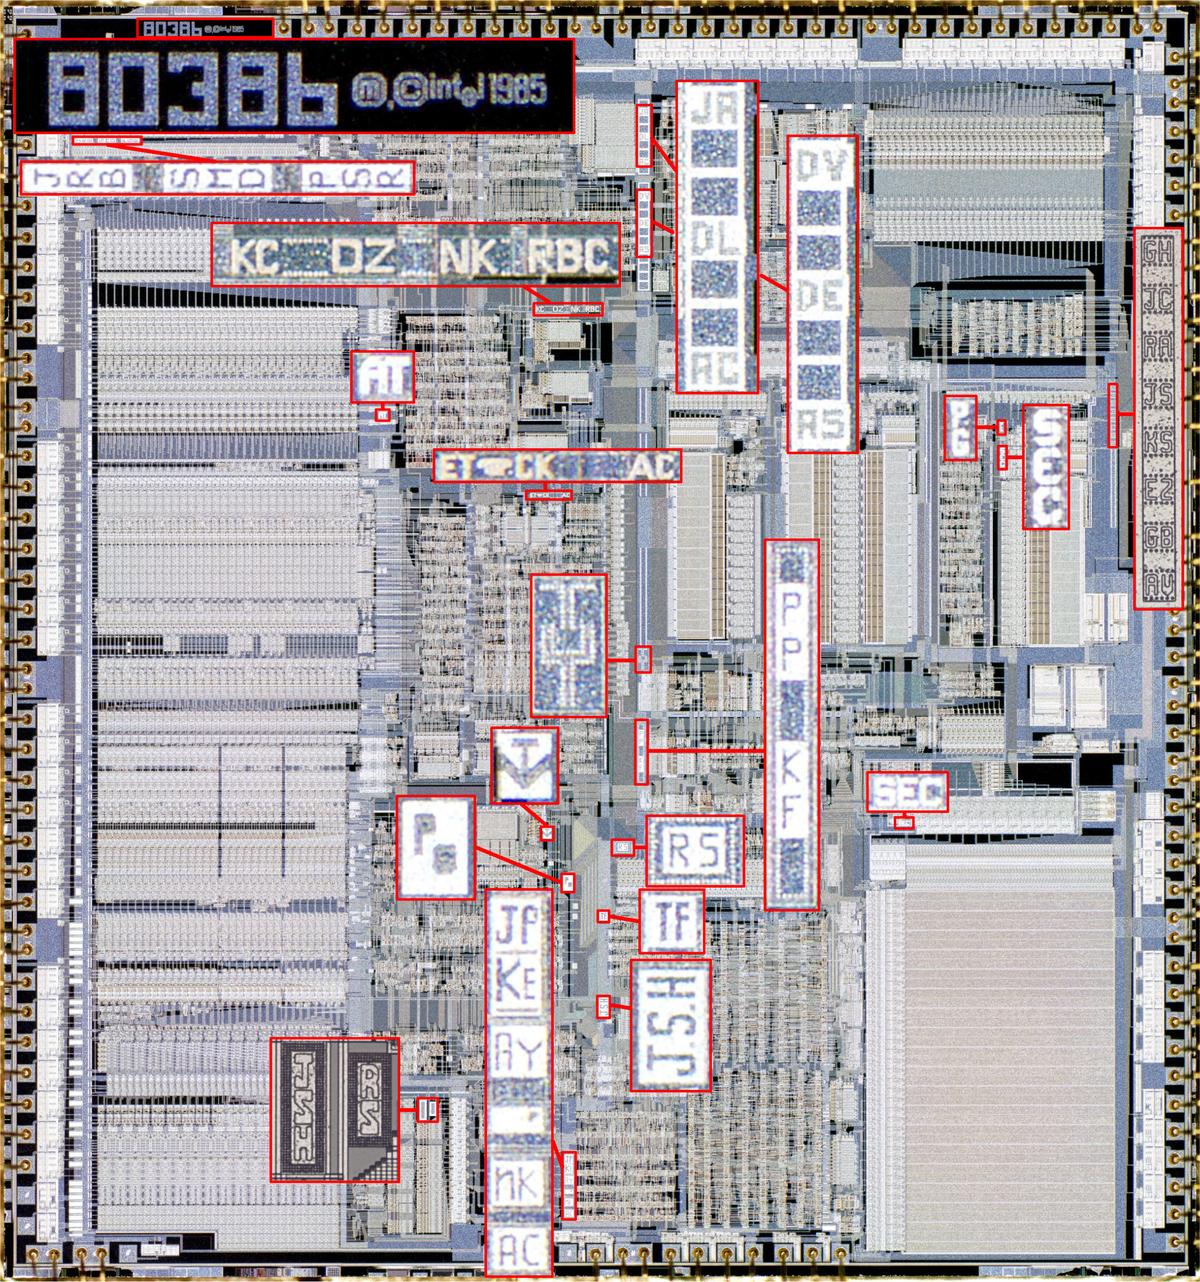 The 386 die with the initials magnified.